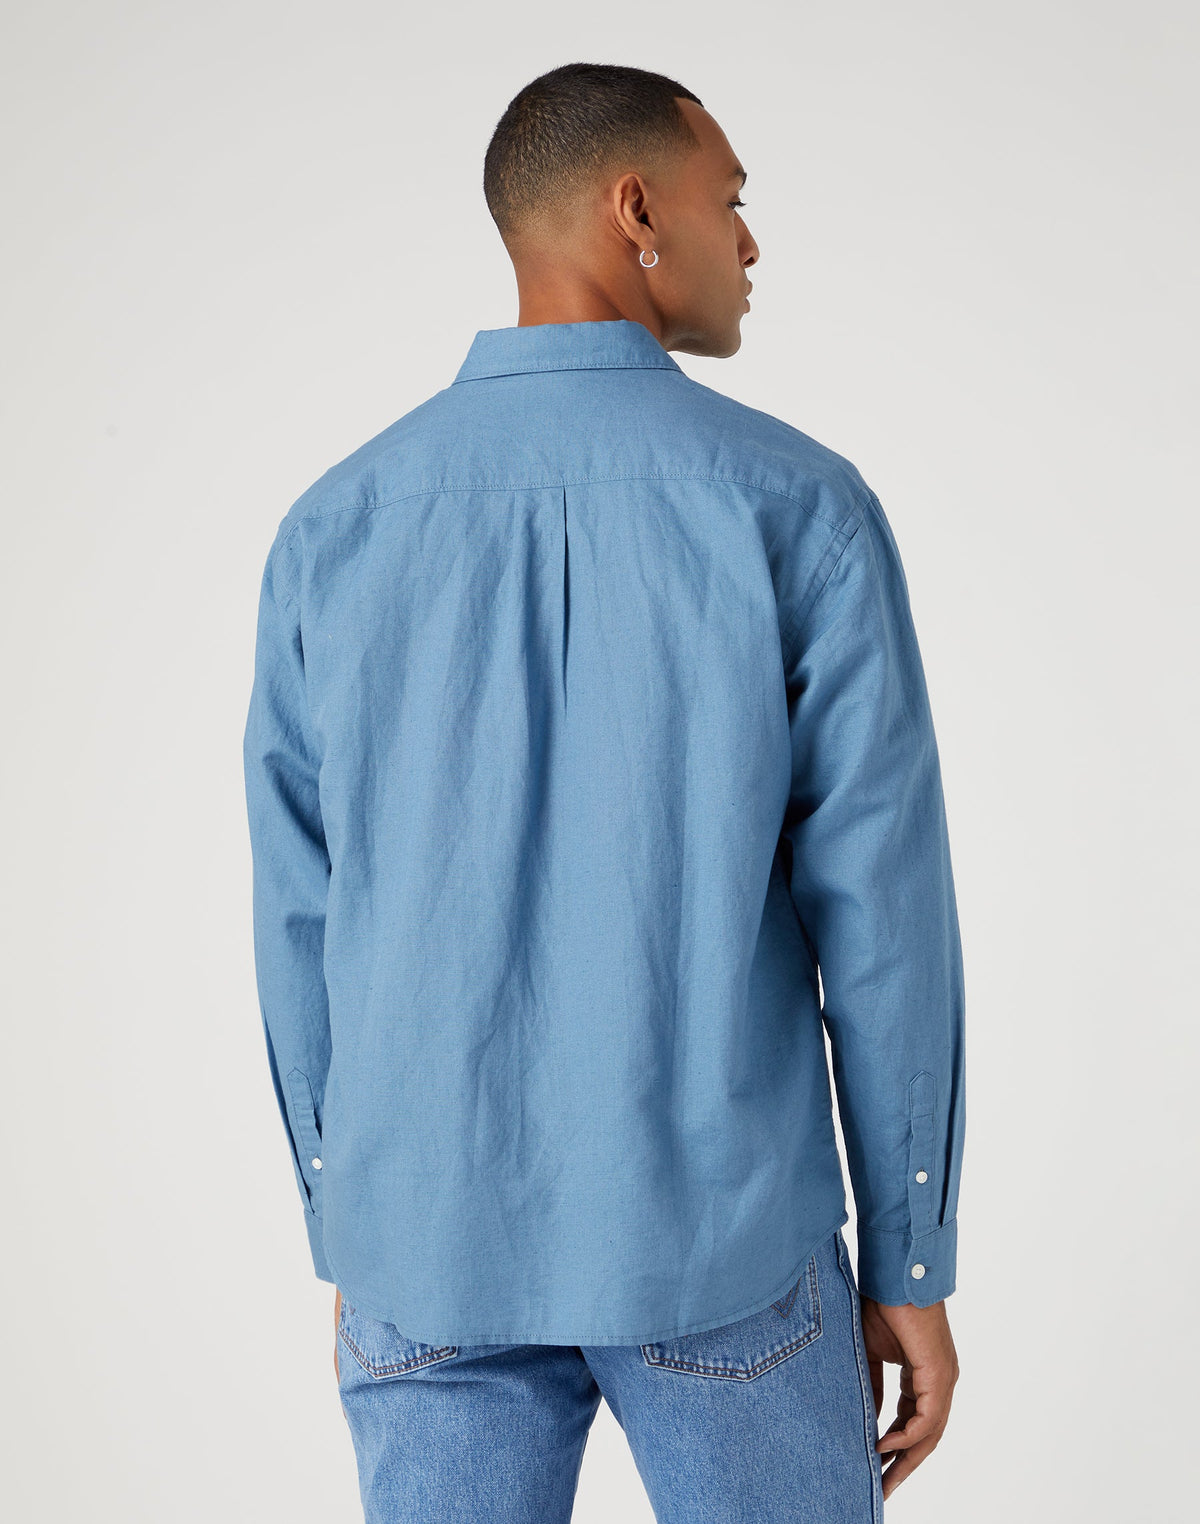 One Pocket Shirt in Captains Blue